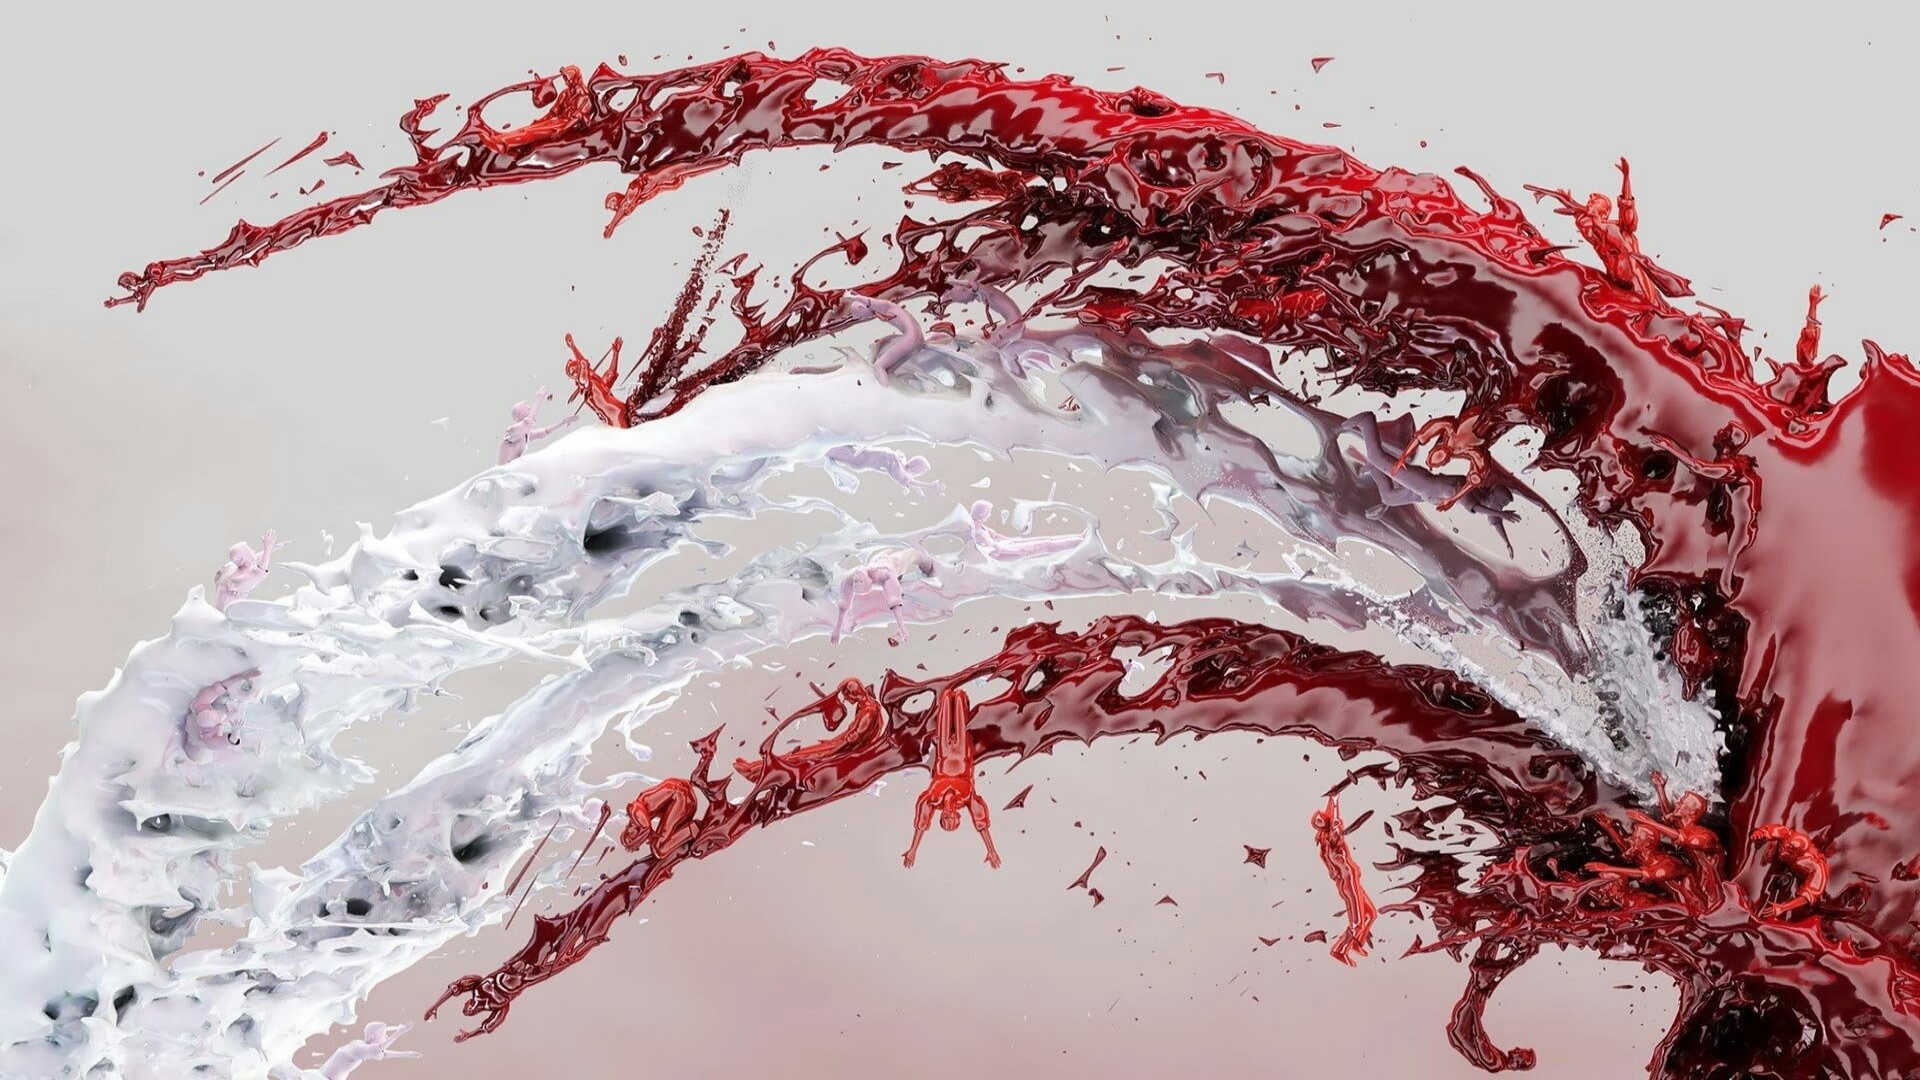 Red and White Liquid Wallpapers 1920x1080